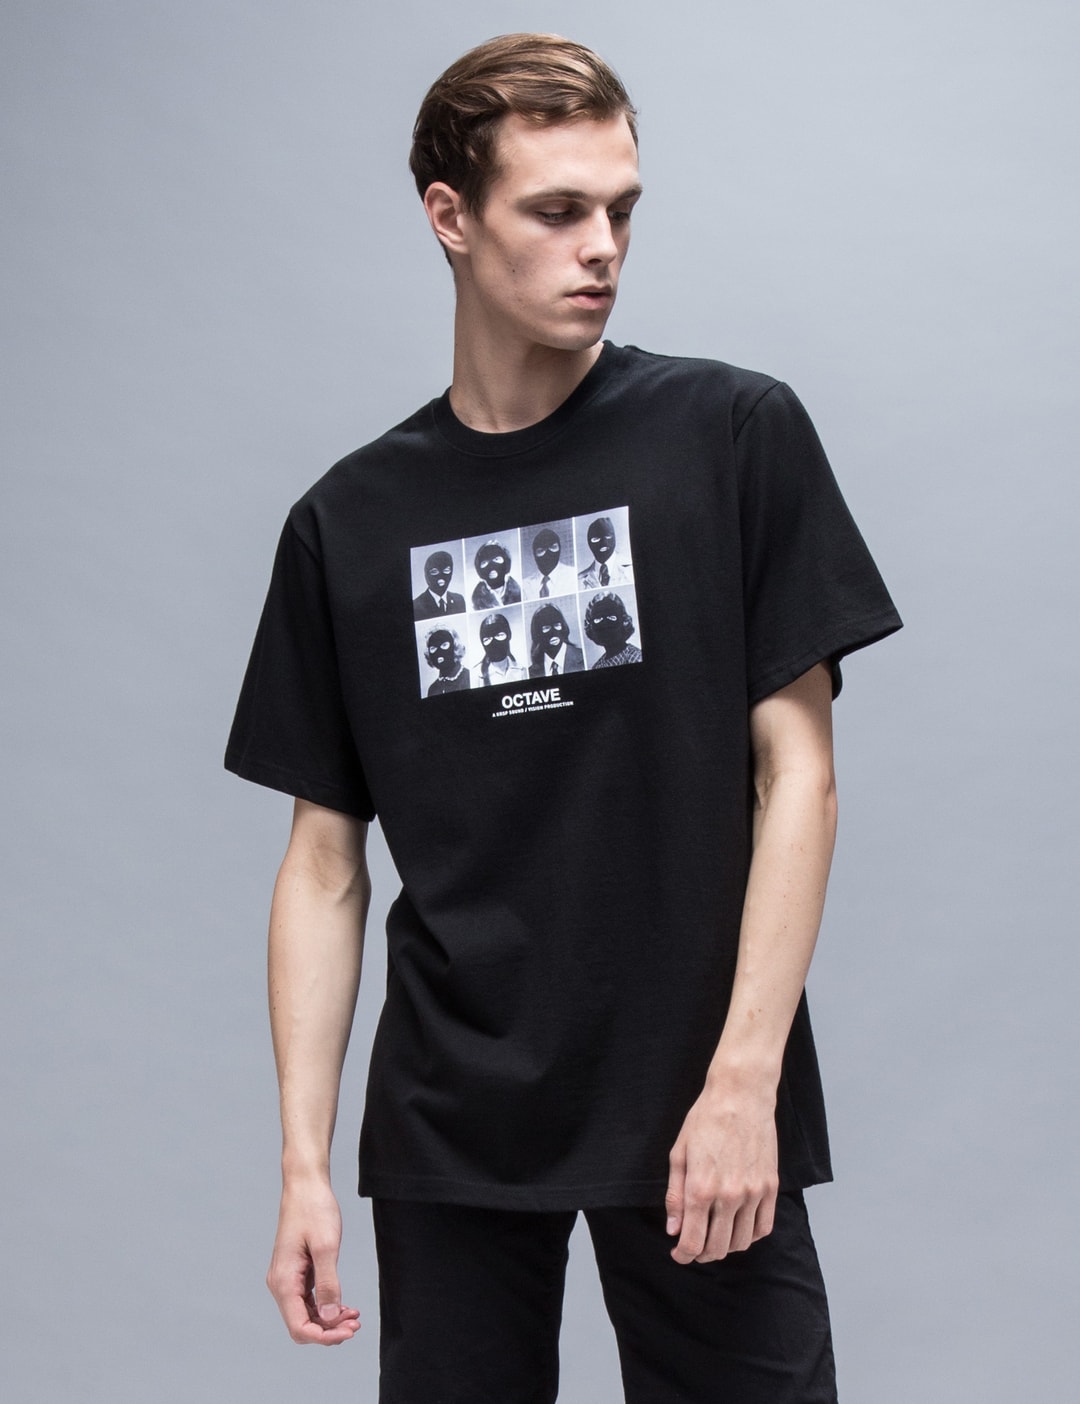 Krsp - Octave S/S T-Shirt | HBX - Globally Curated Fashion and ...